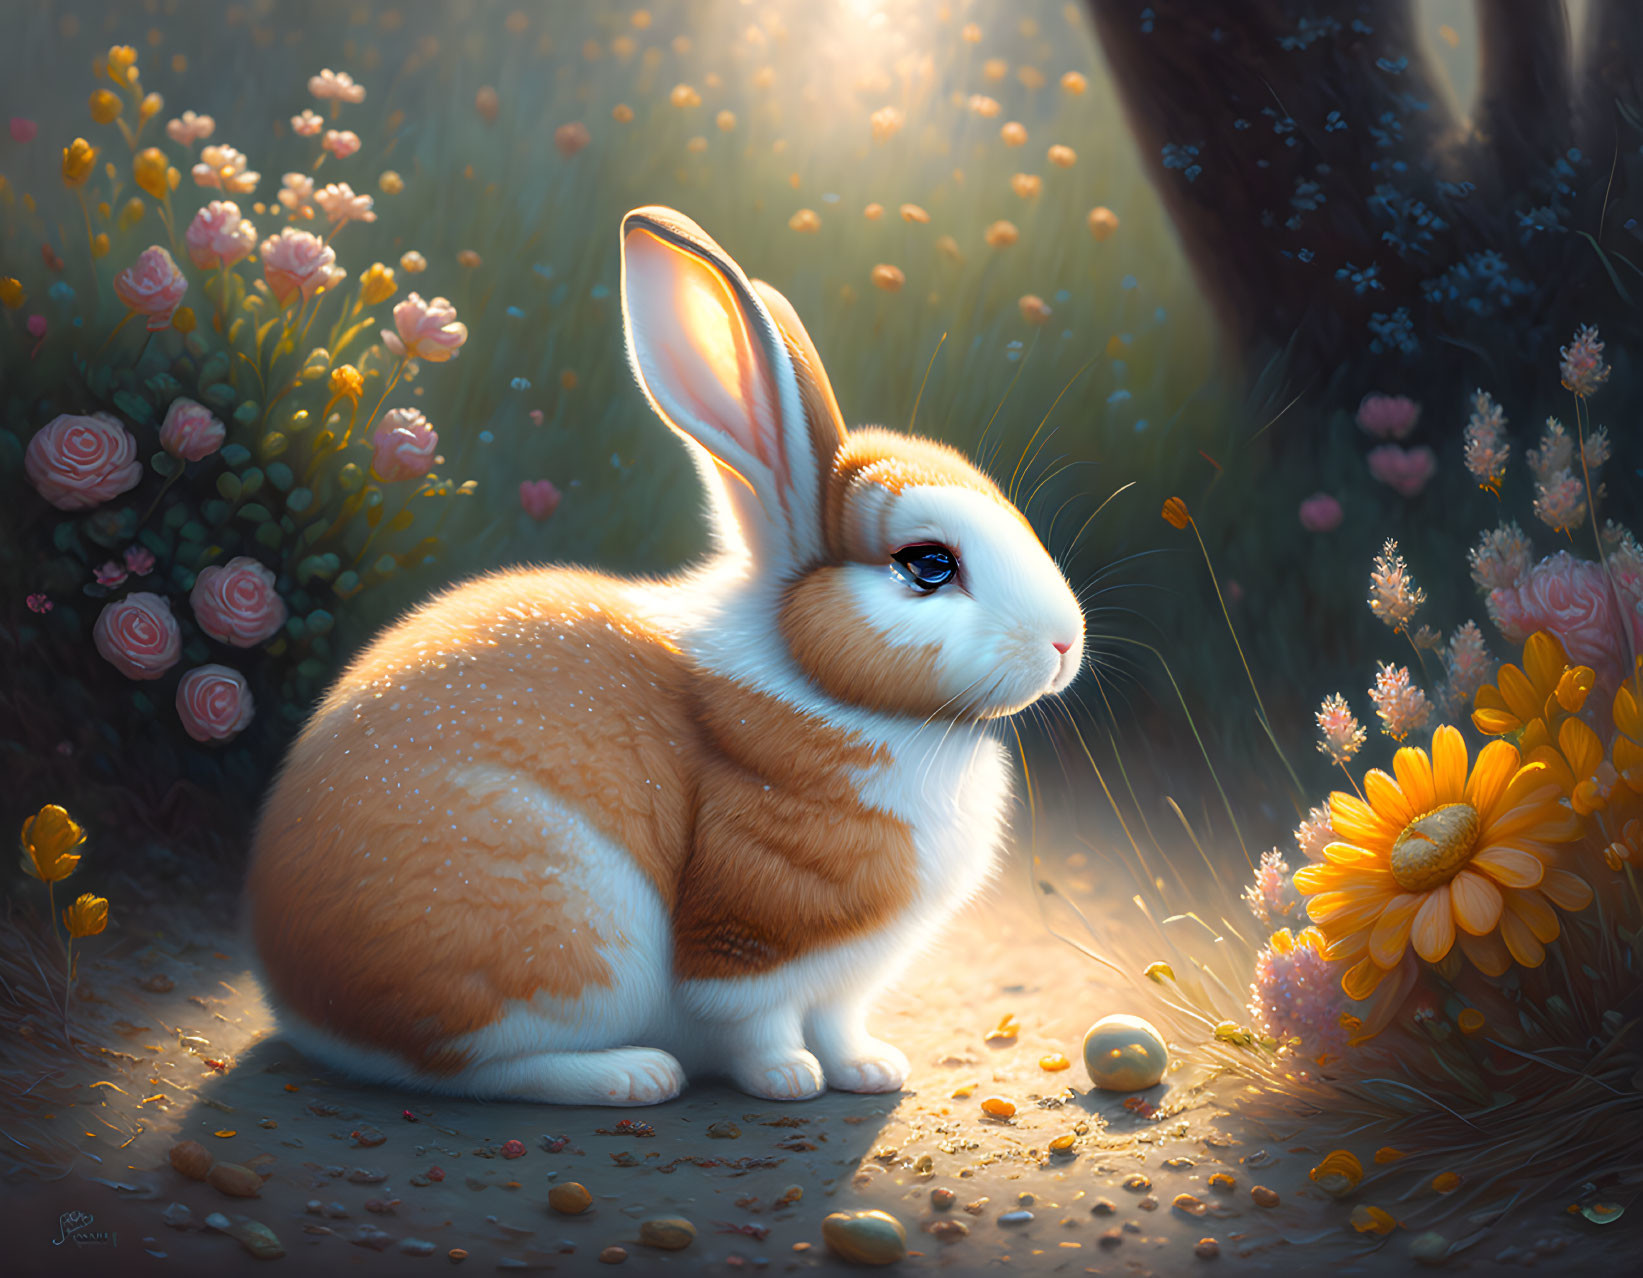 Brown and White Bunny Surrounded by Wildflowers in Soft Lighting